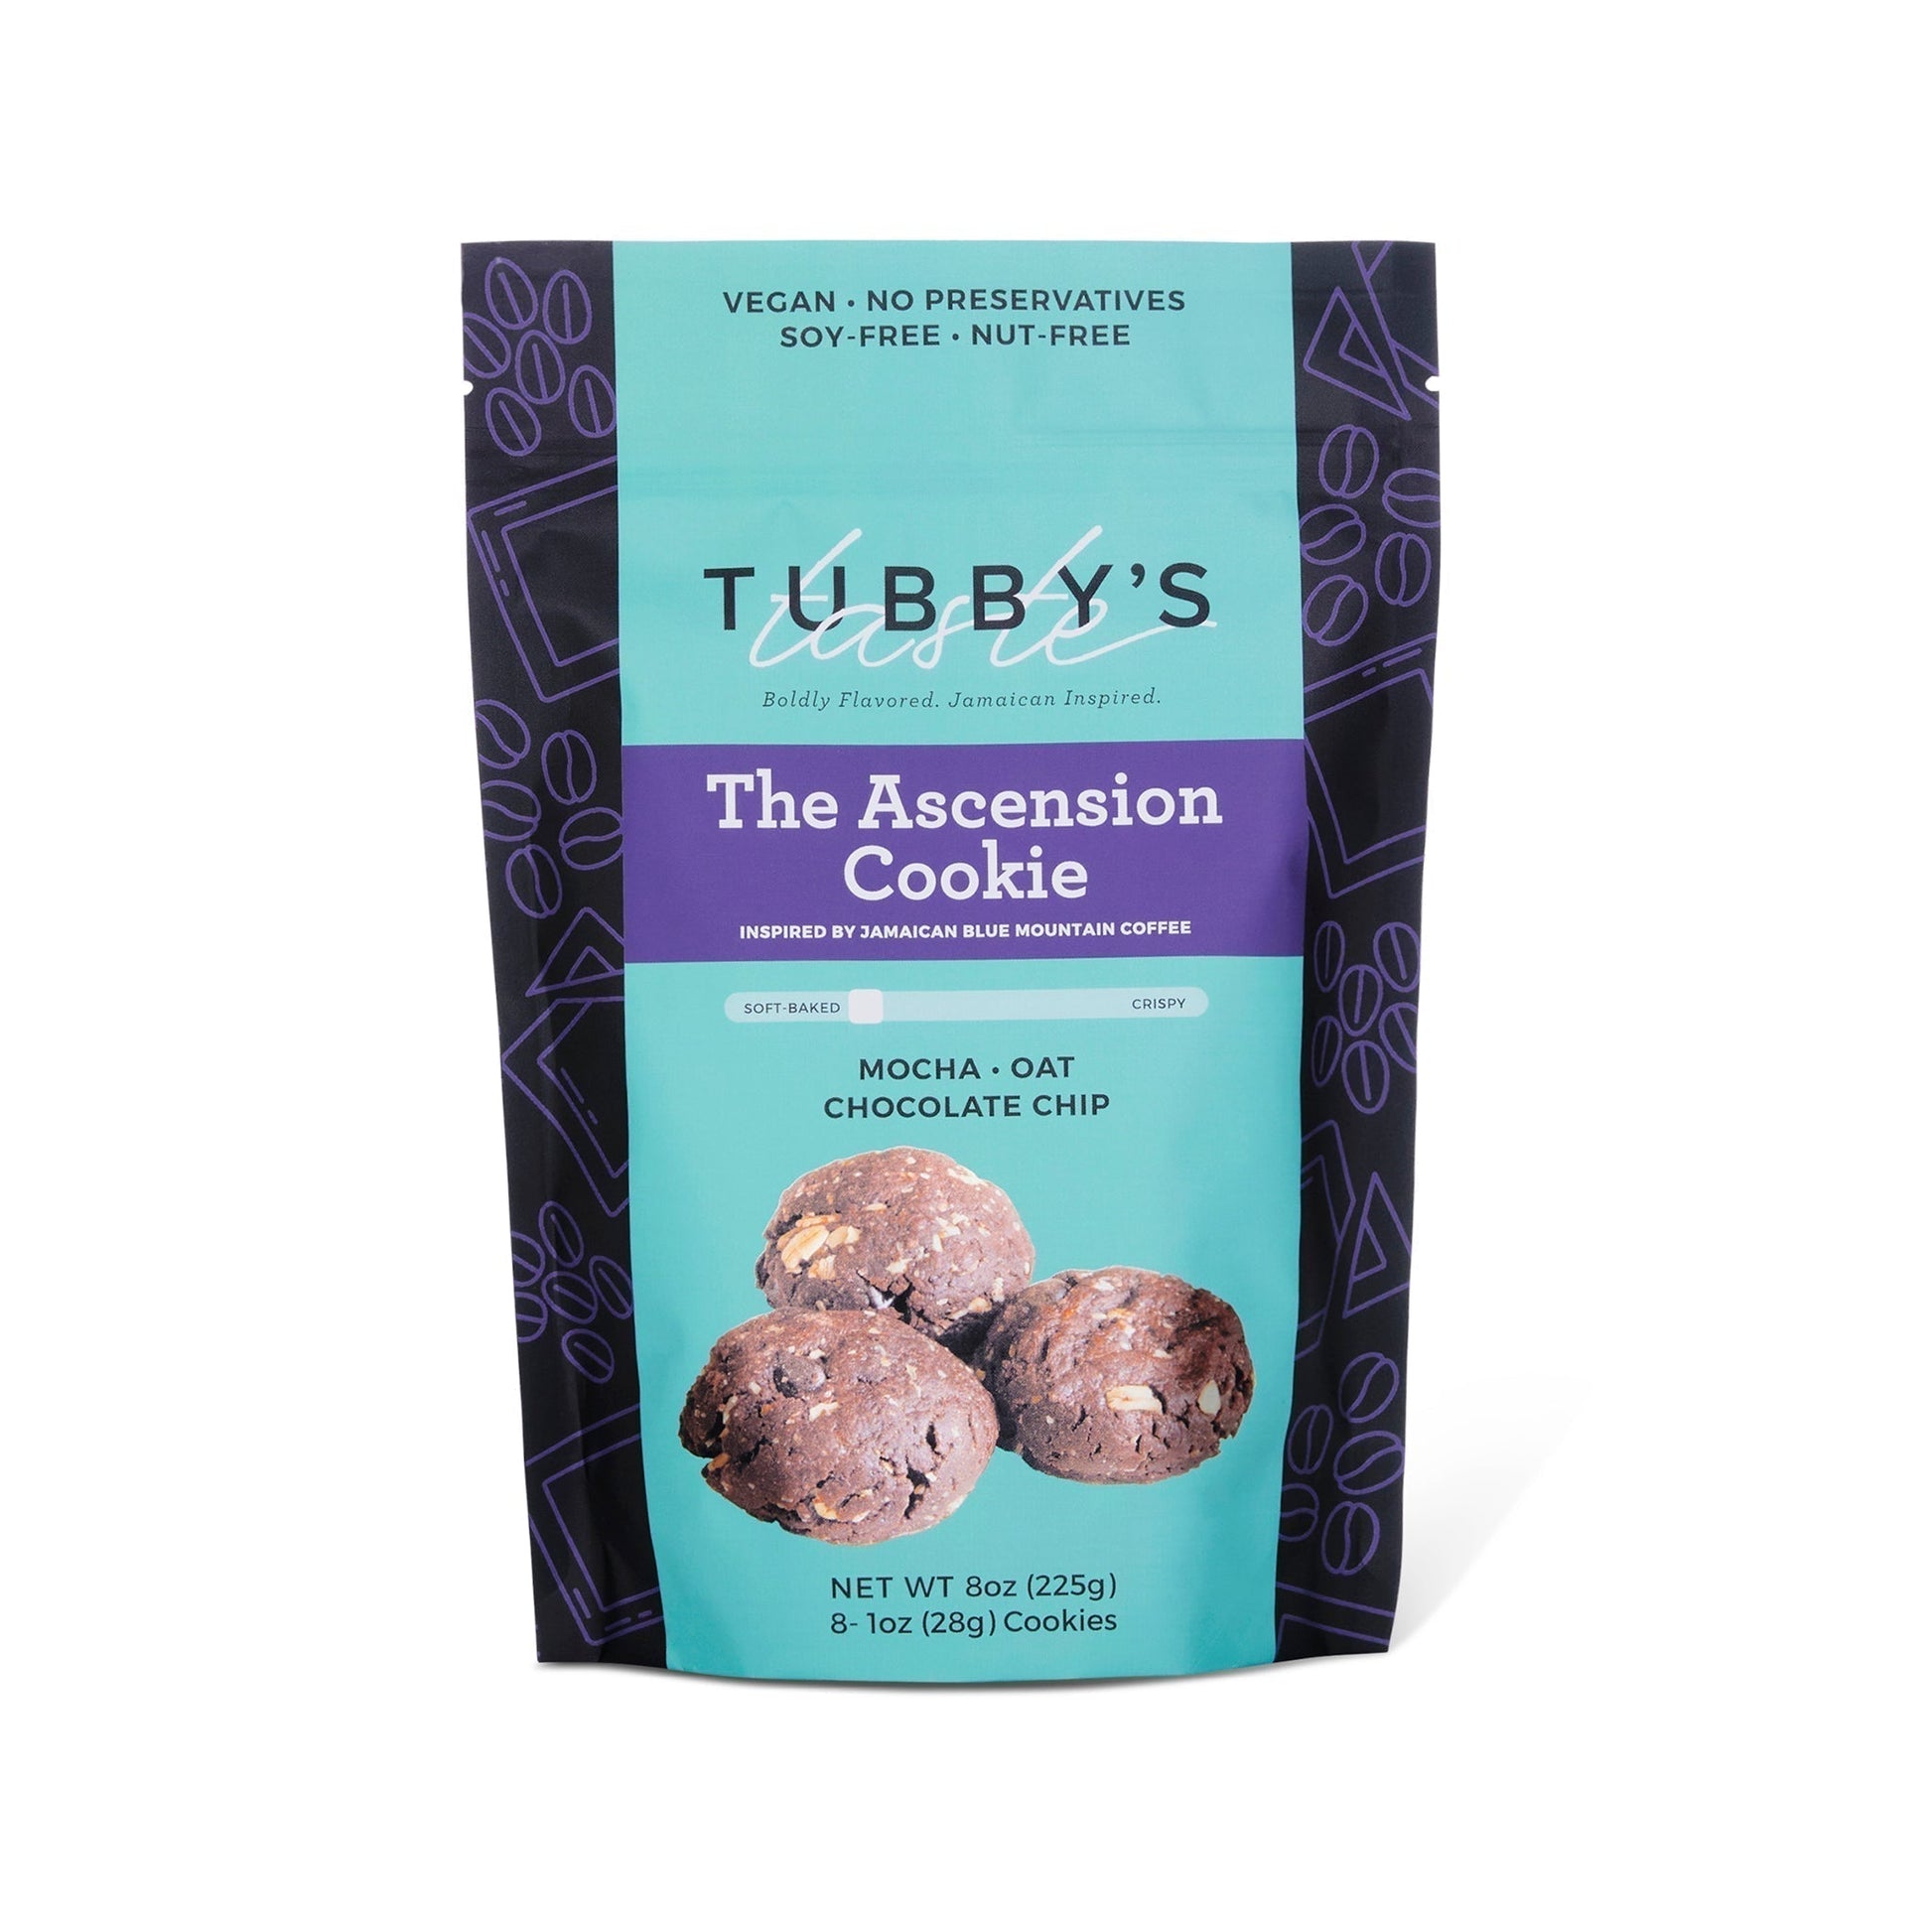 A Tubby's Taste Bag of Mocha Oat Chocolate Chip Cookies on a white background